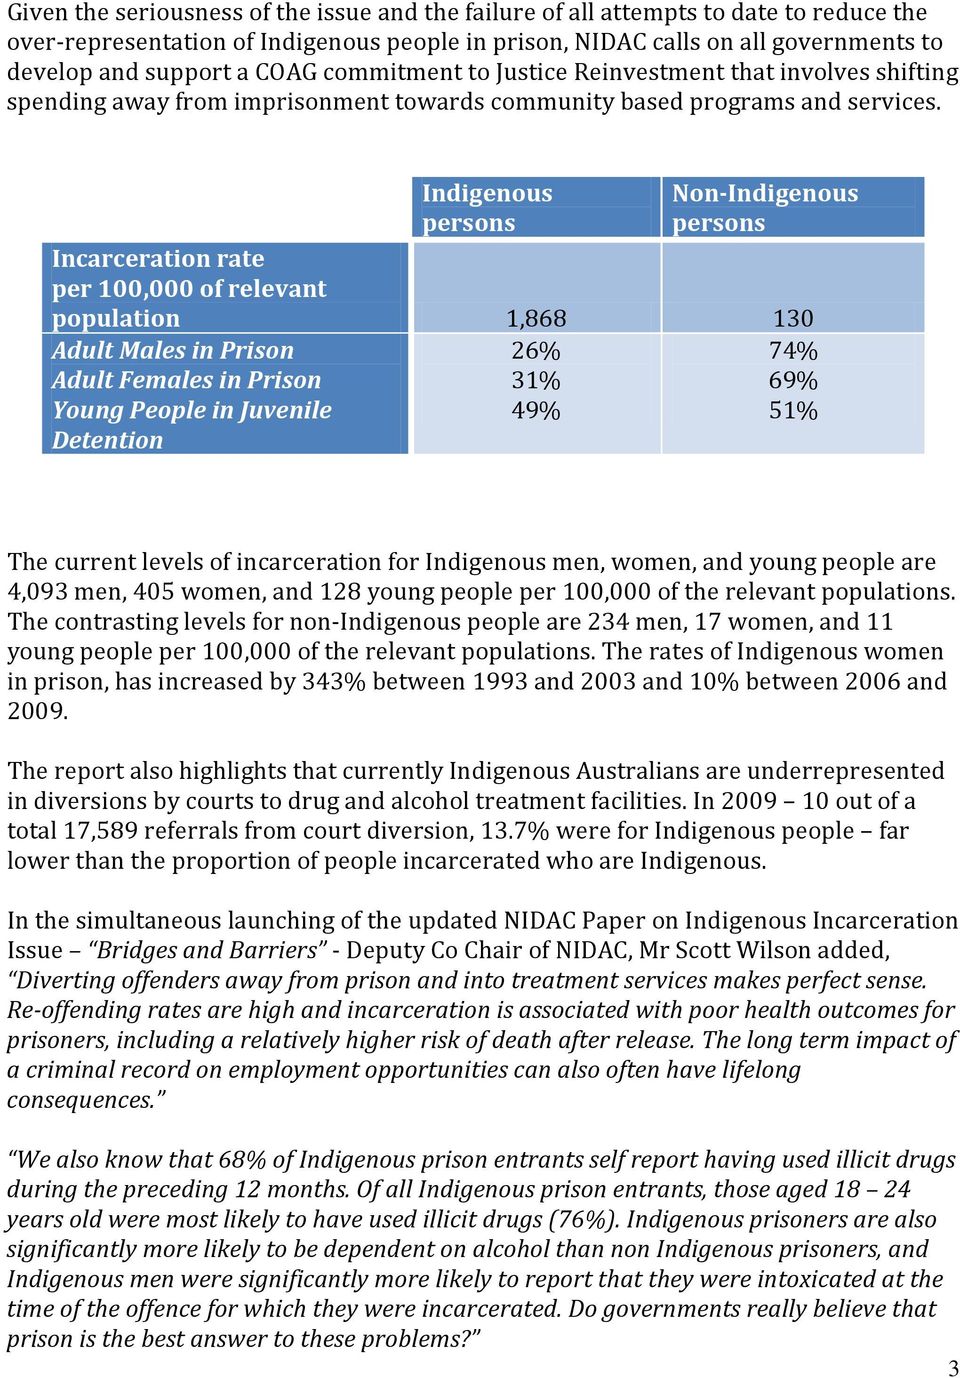 Indigenous persons Non-Indigenous persons Incarceration rate per 100,000 of relevant population 1,868 130 Adult Males in Prison Adult Females in Prison Young People in Juvenile Detention 26% 31% 49%